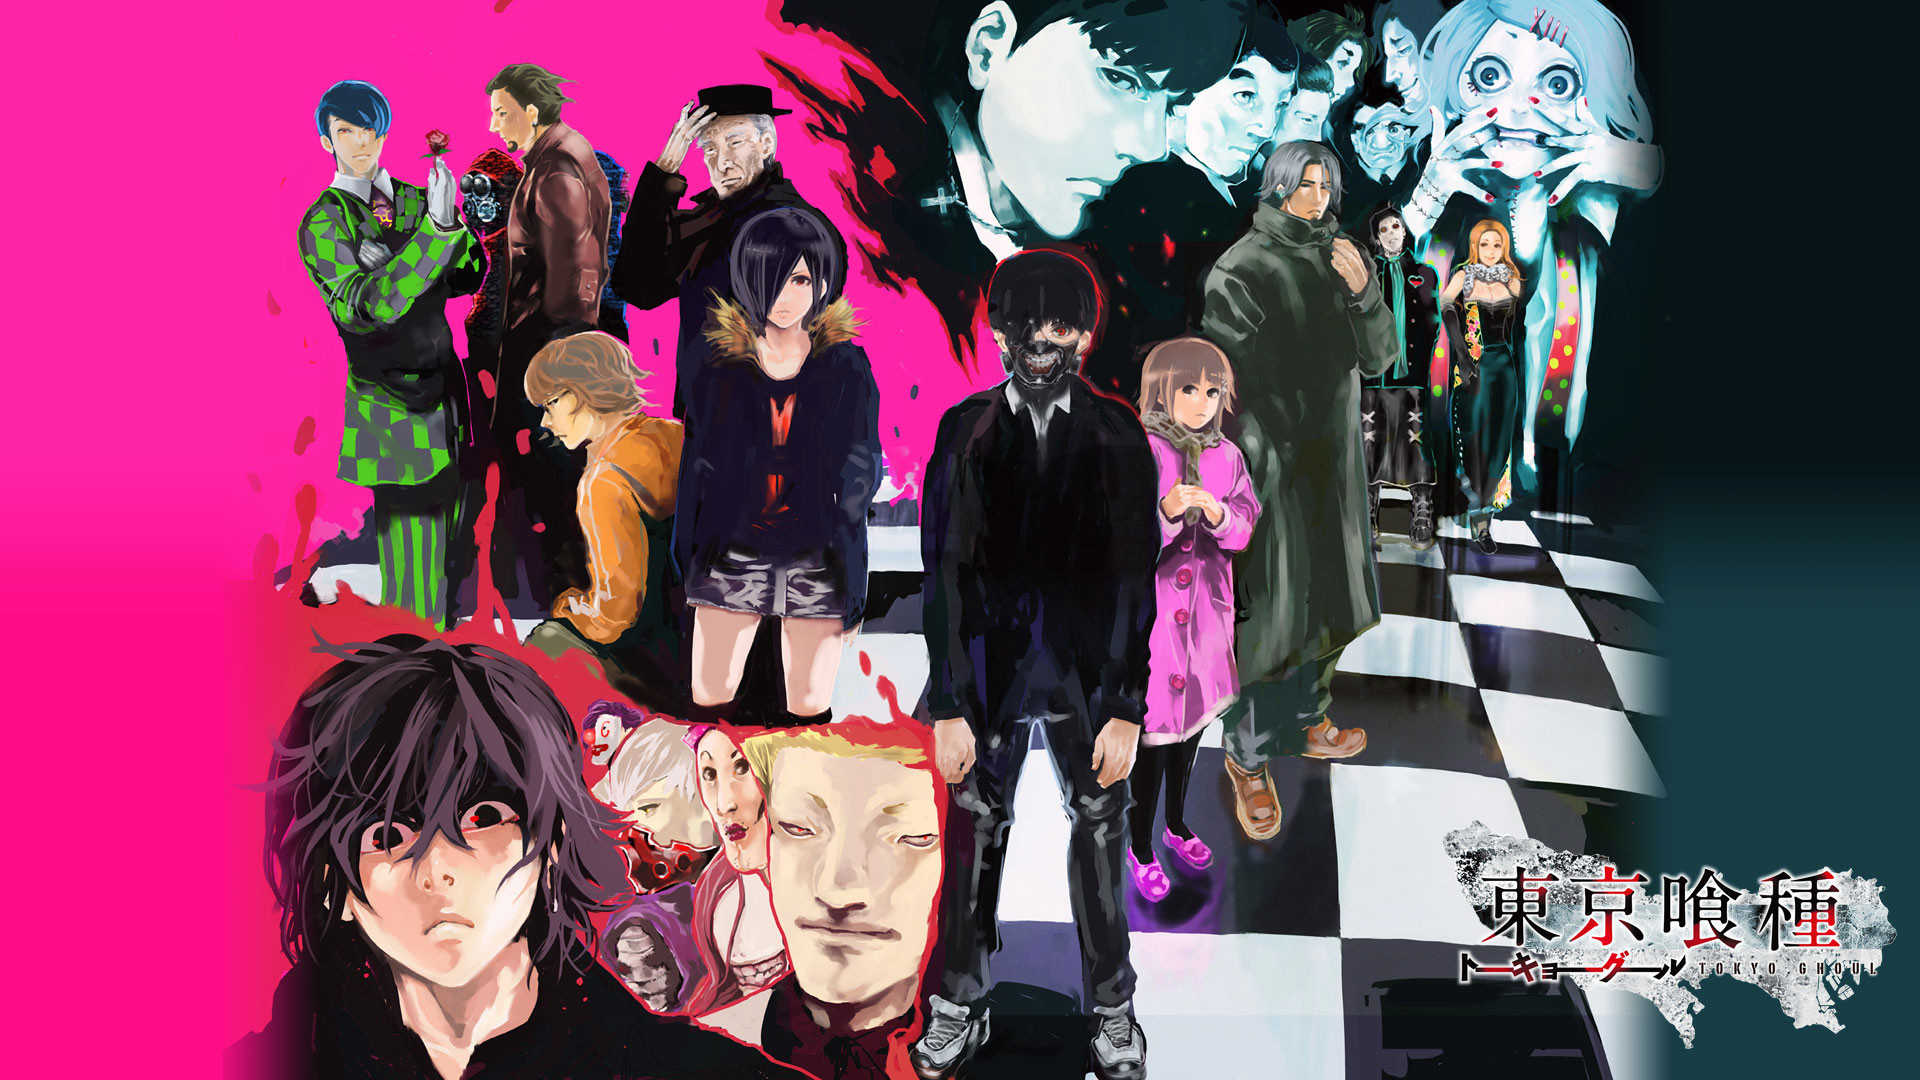 1920x1080 tokyo ghoul characters anime